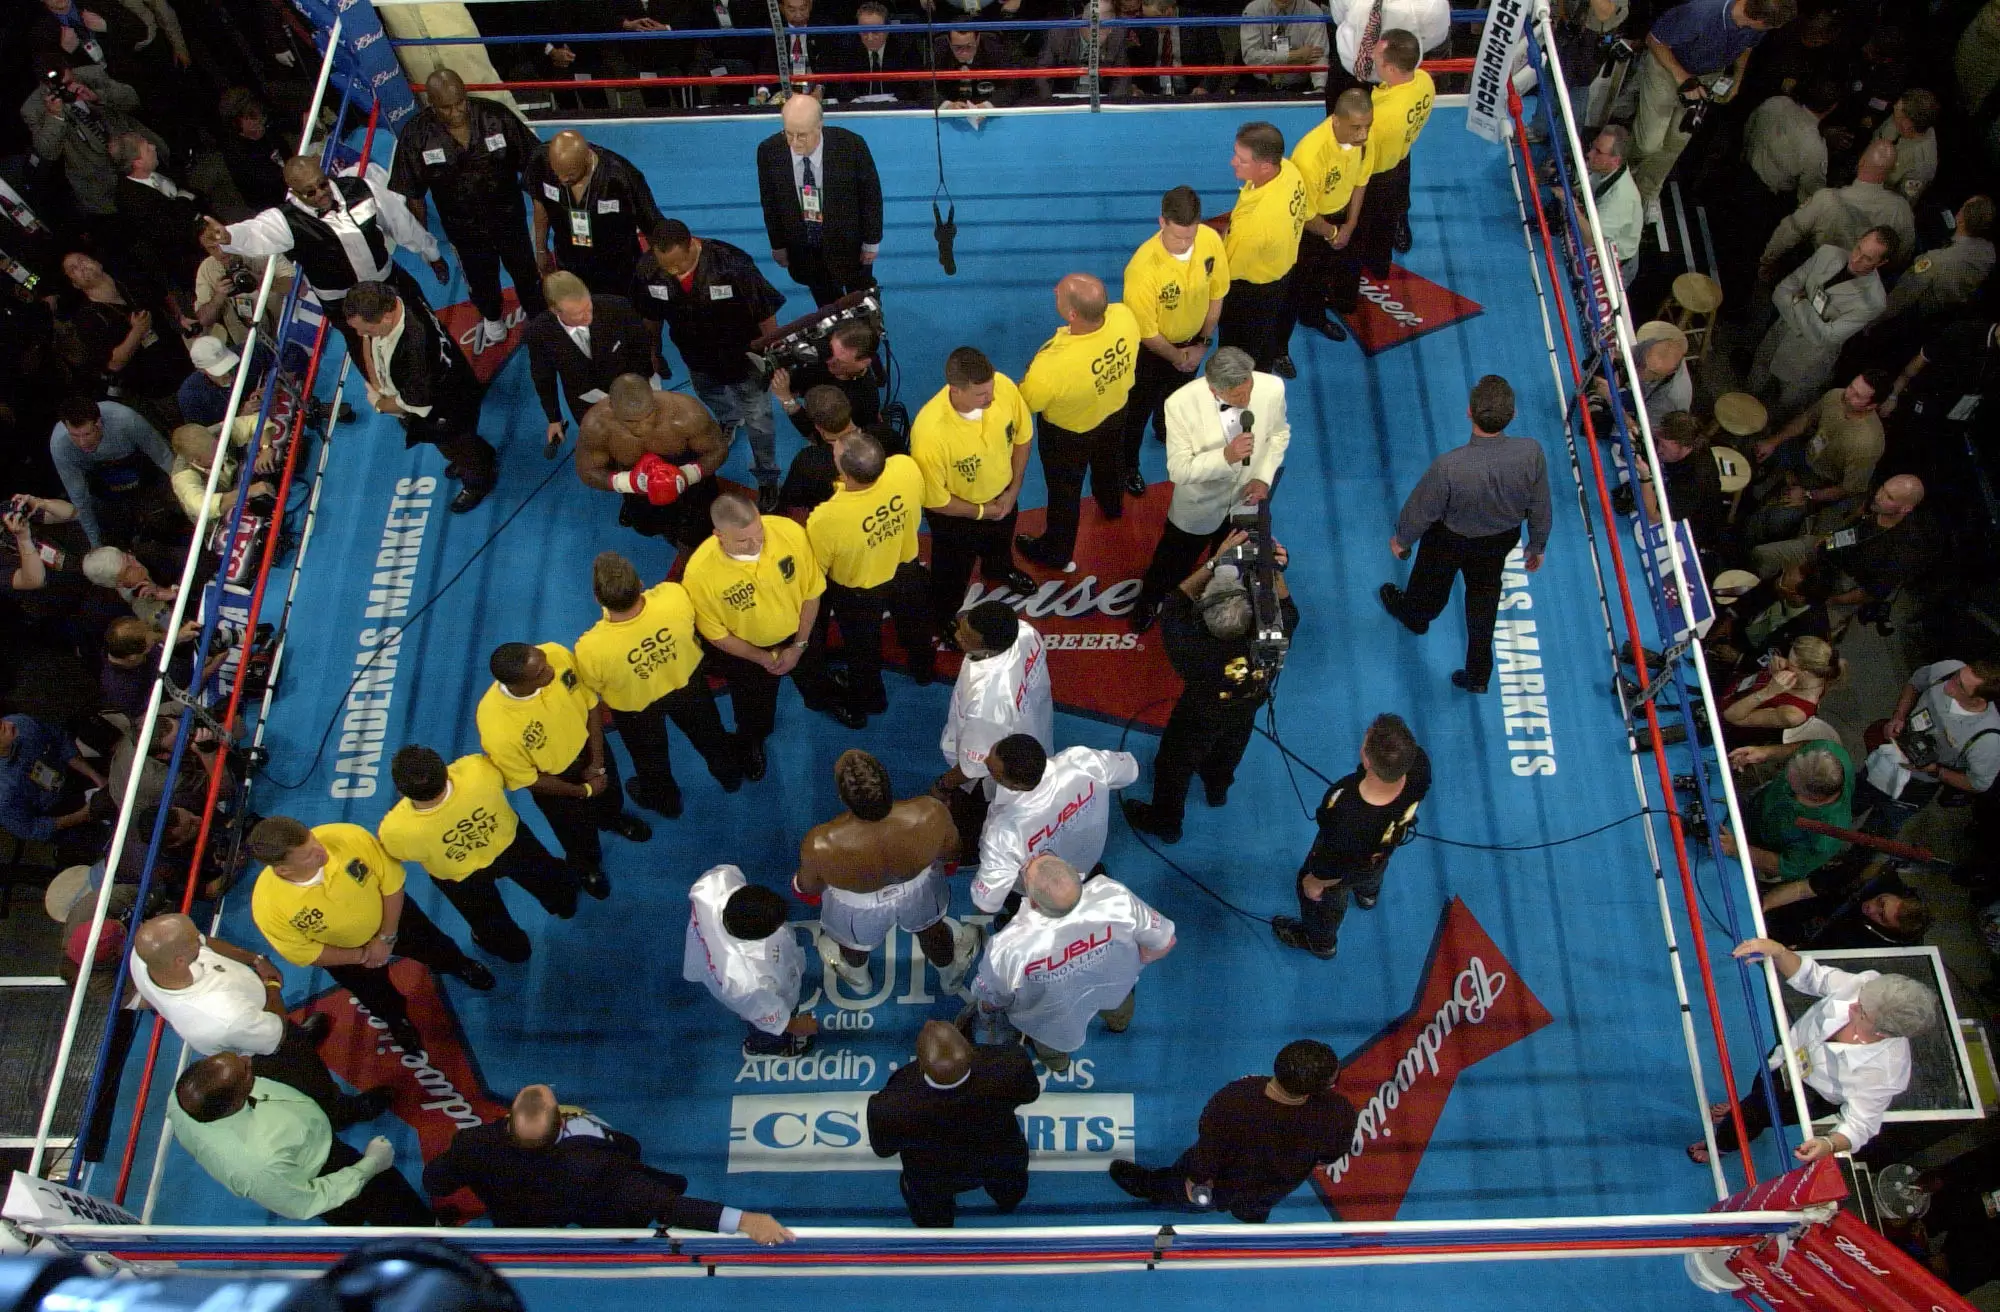 A line of security separates Tyson and Lewis in the ring before their heavyweight championship fight. Image: PA